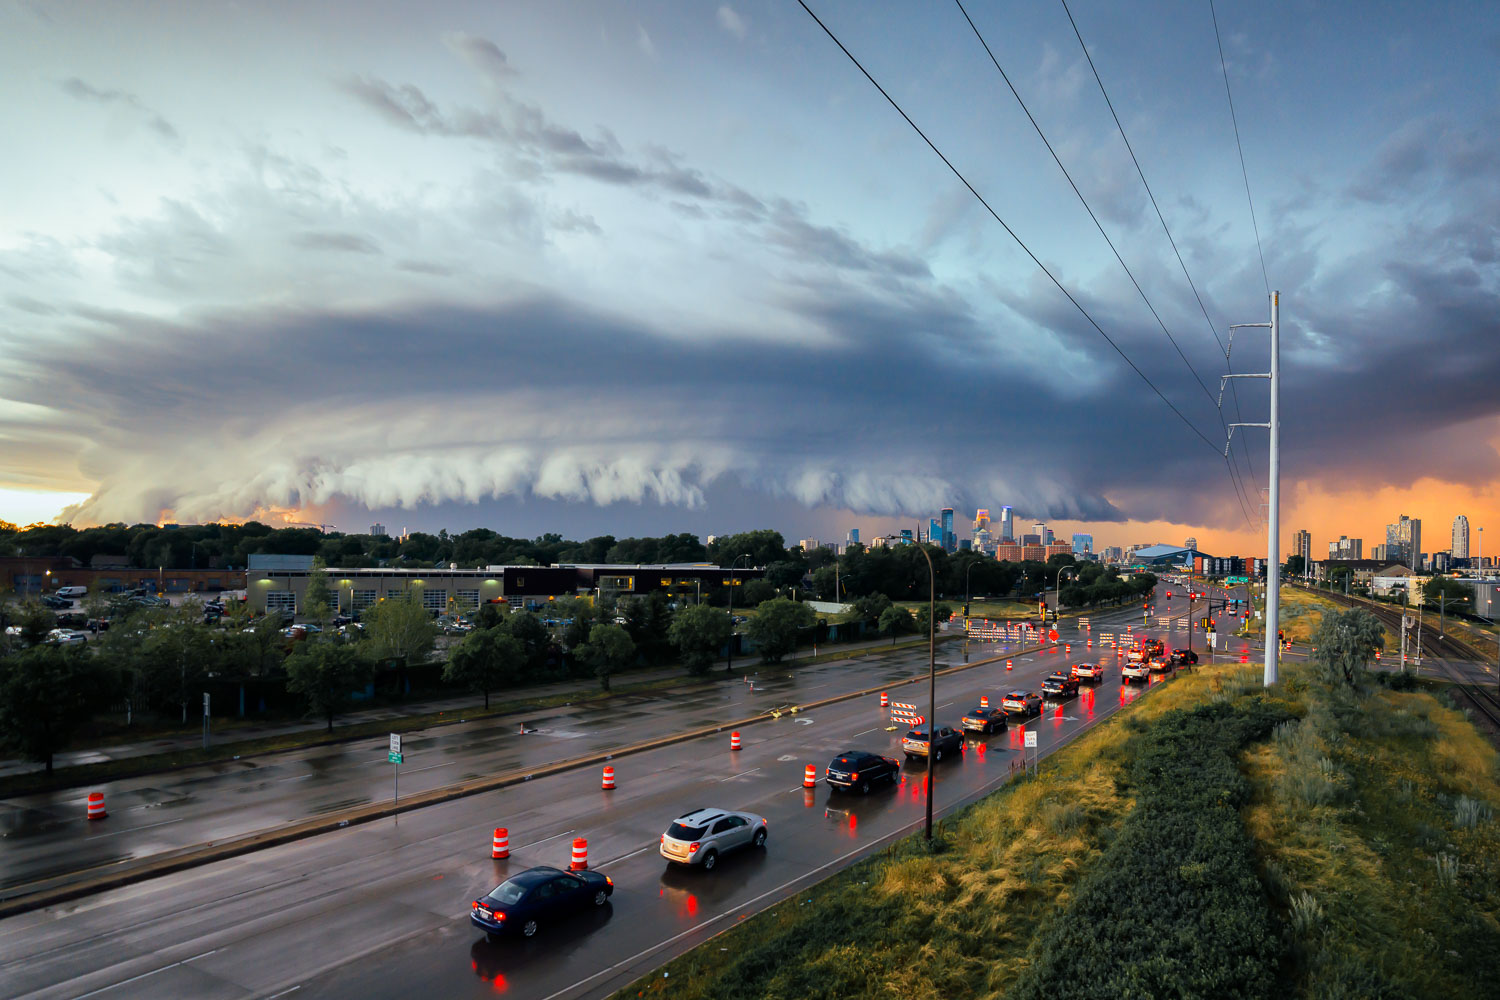 Storm clouds roll through Minneapolis on July 12, 2022.